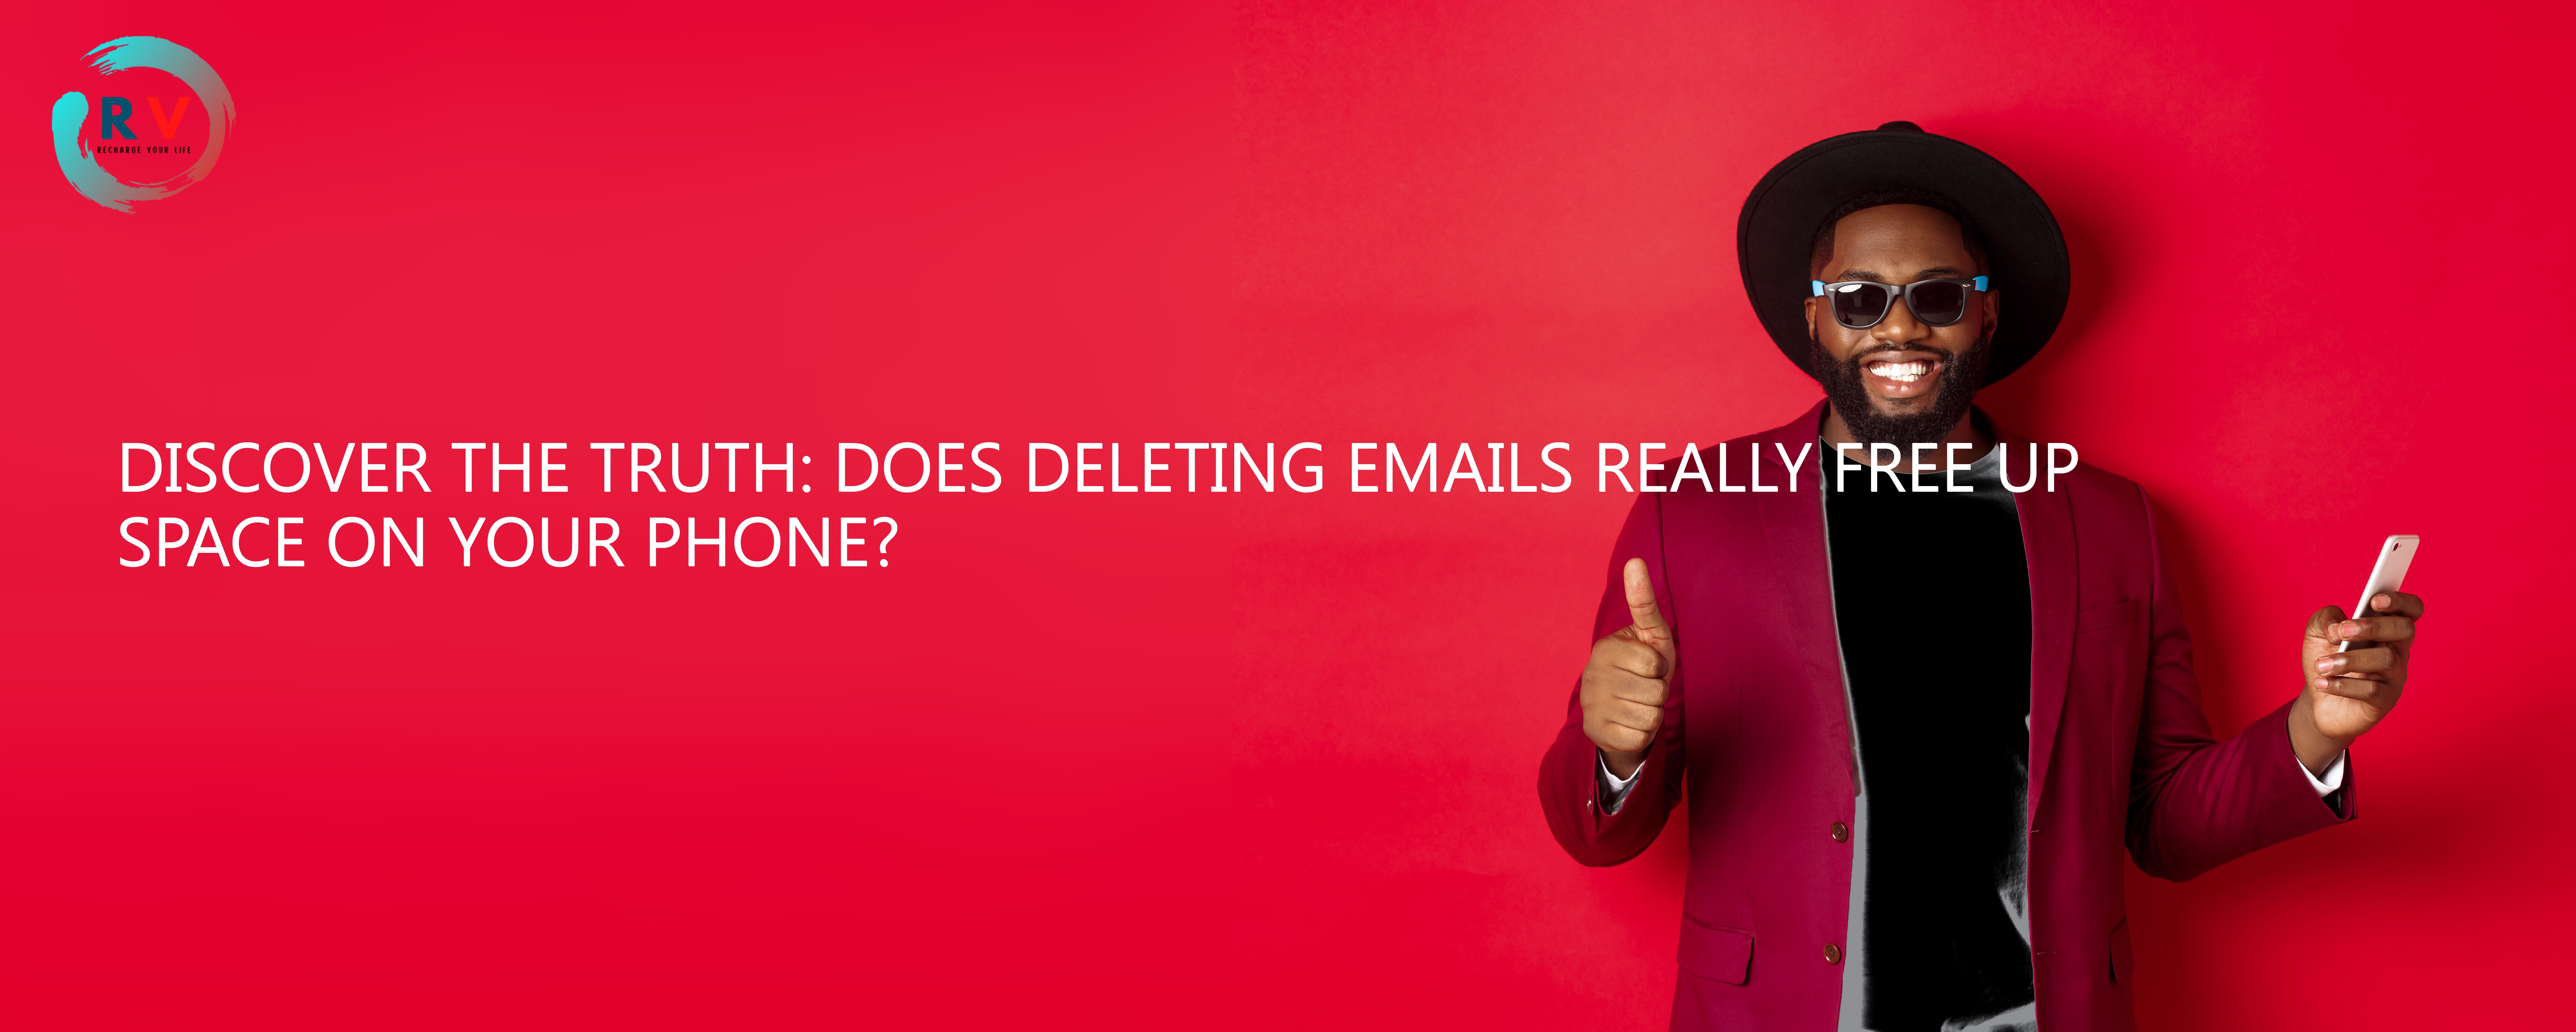 Does deleting emails free up space on your phone?